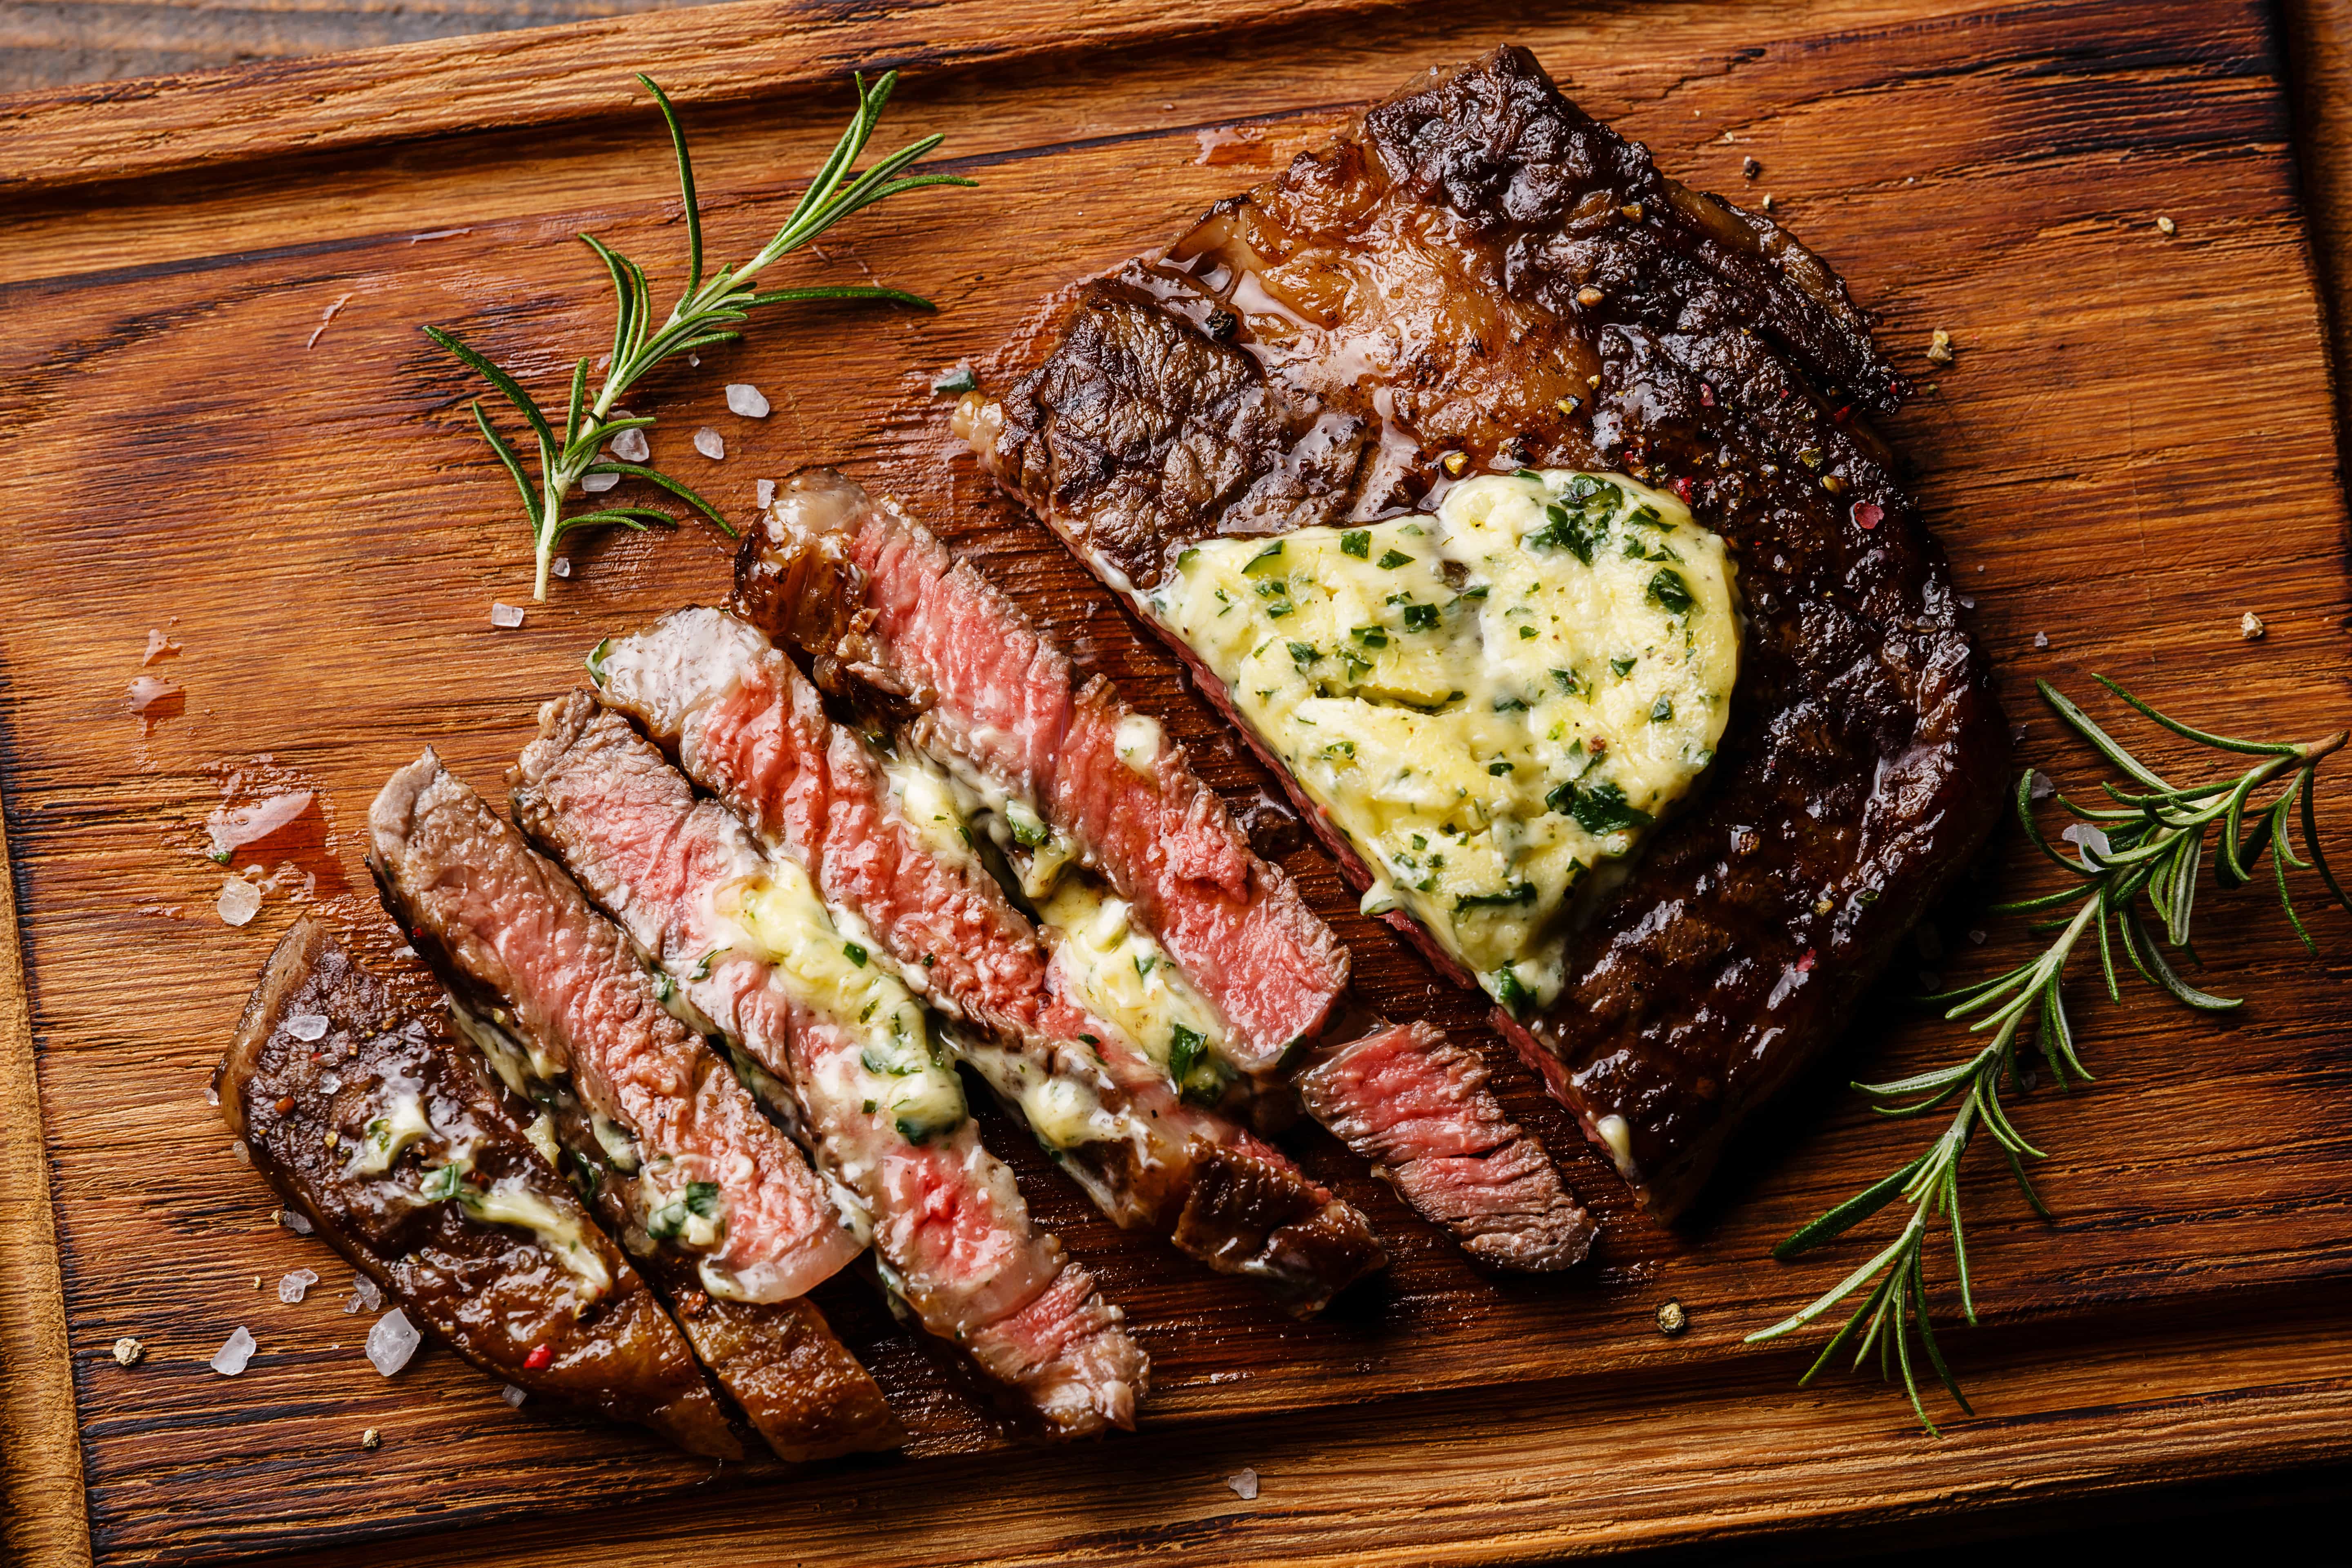 Grilled Rubbed Ribeye Steak with Garlic Steakhouse Butter